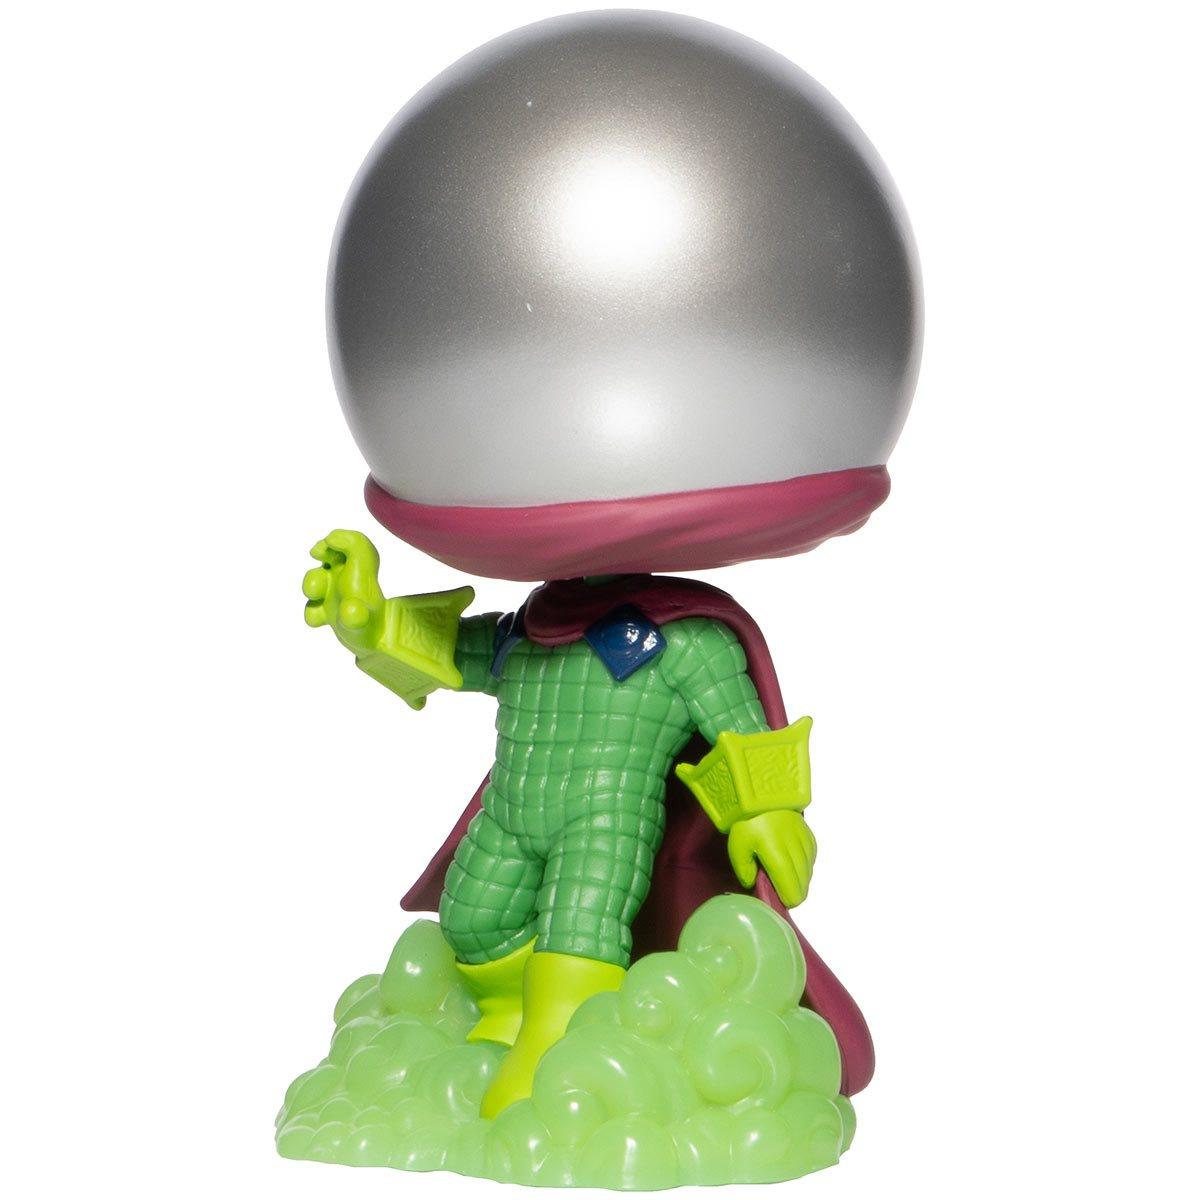 Funko Pop! Marvel - Mysterio Glow-in-the-Dark - BumbleToys - 18+, Action Figures, Avengers, Boys, Characters, Funko, Marvel, Pre-Order